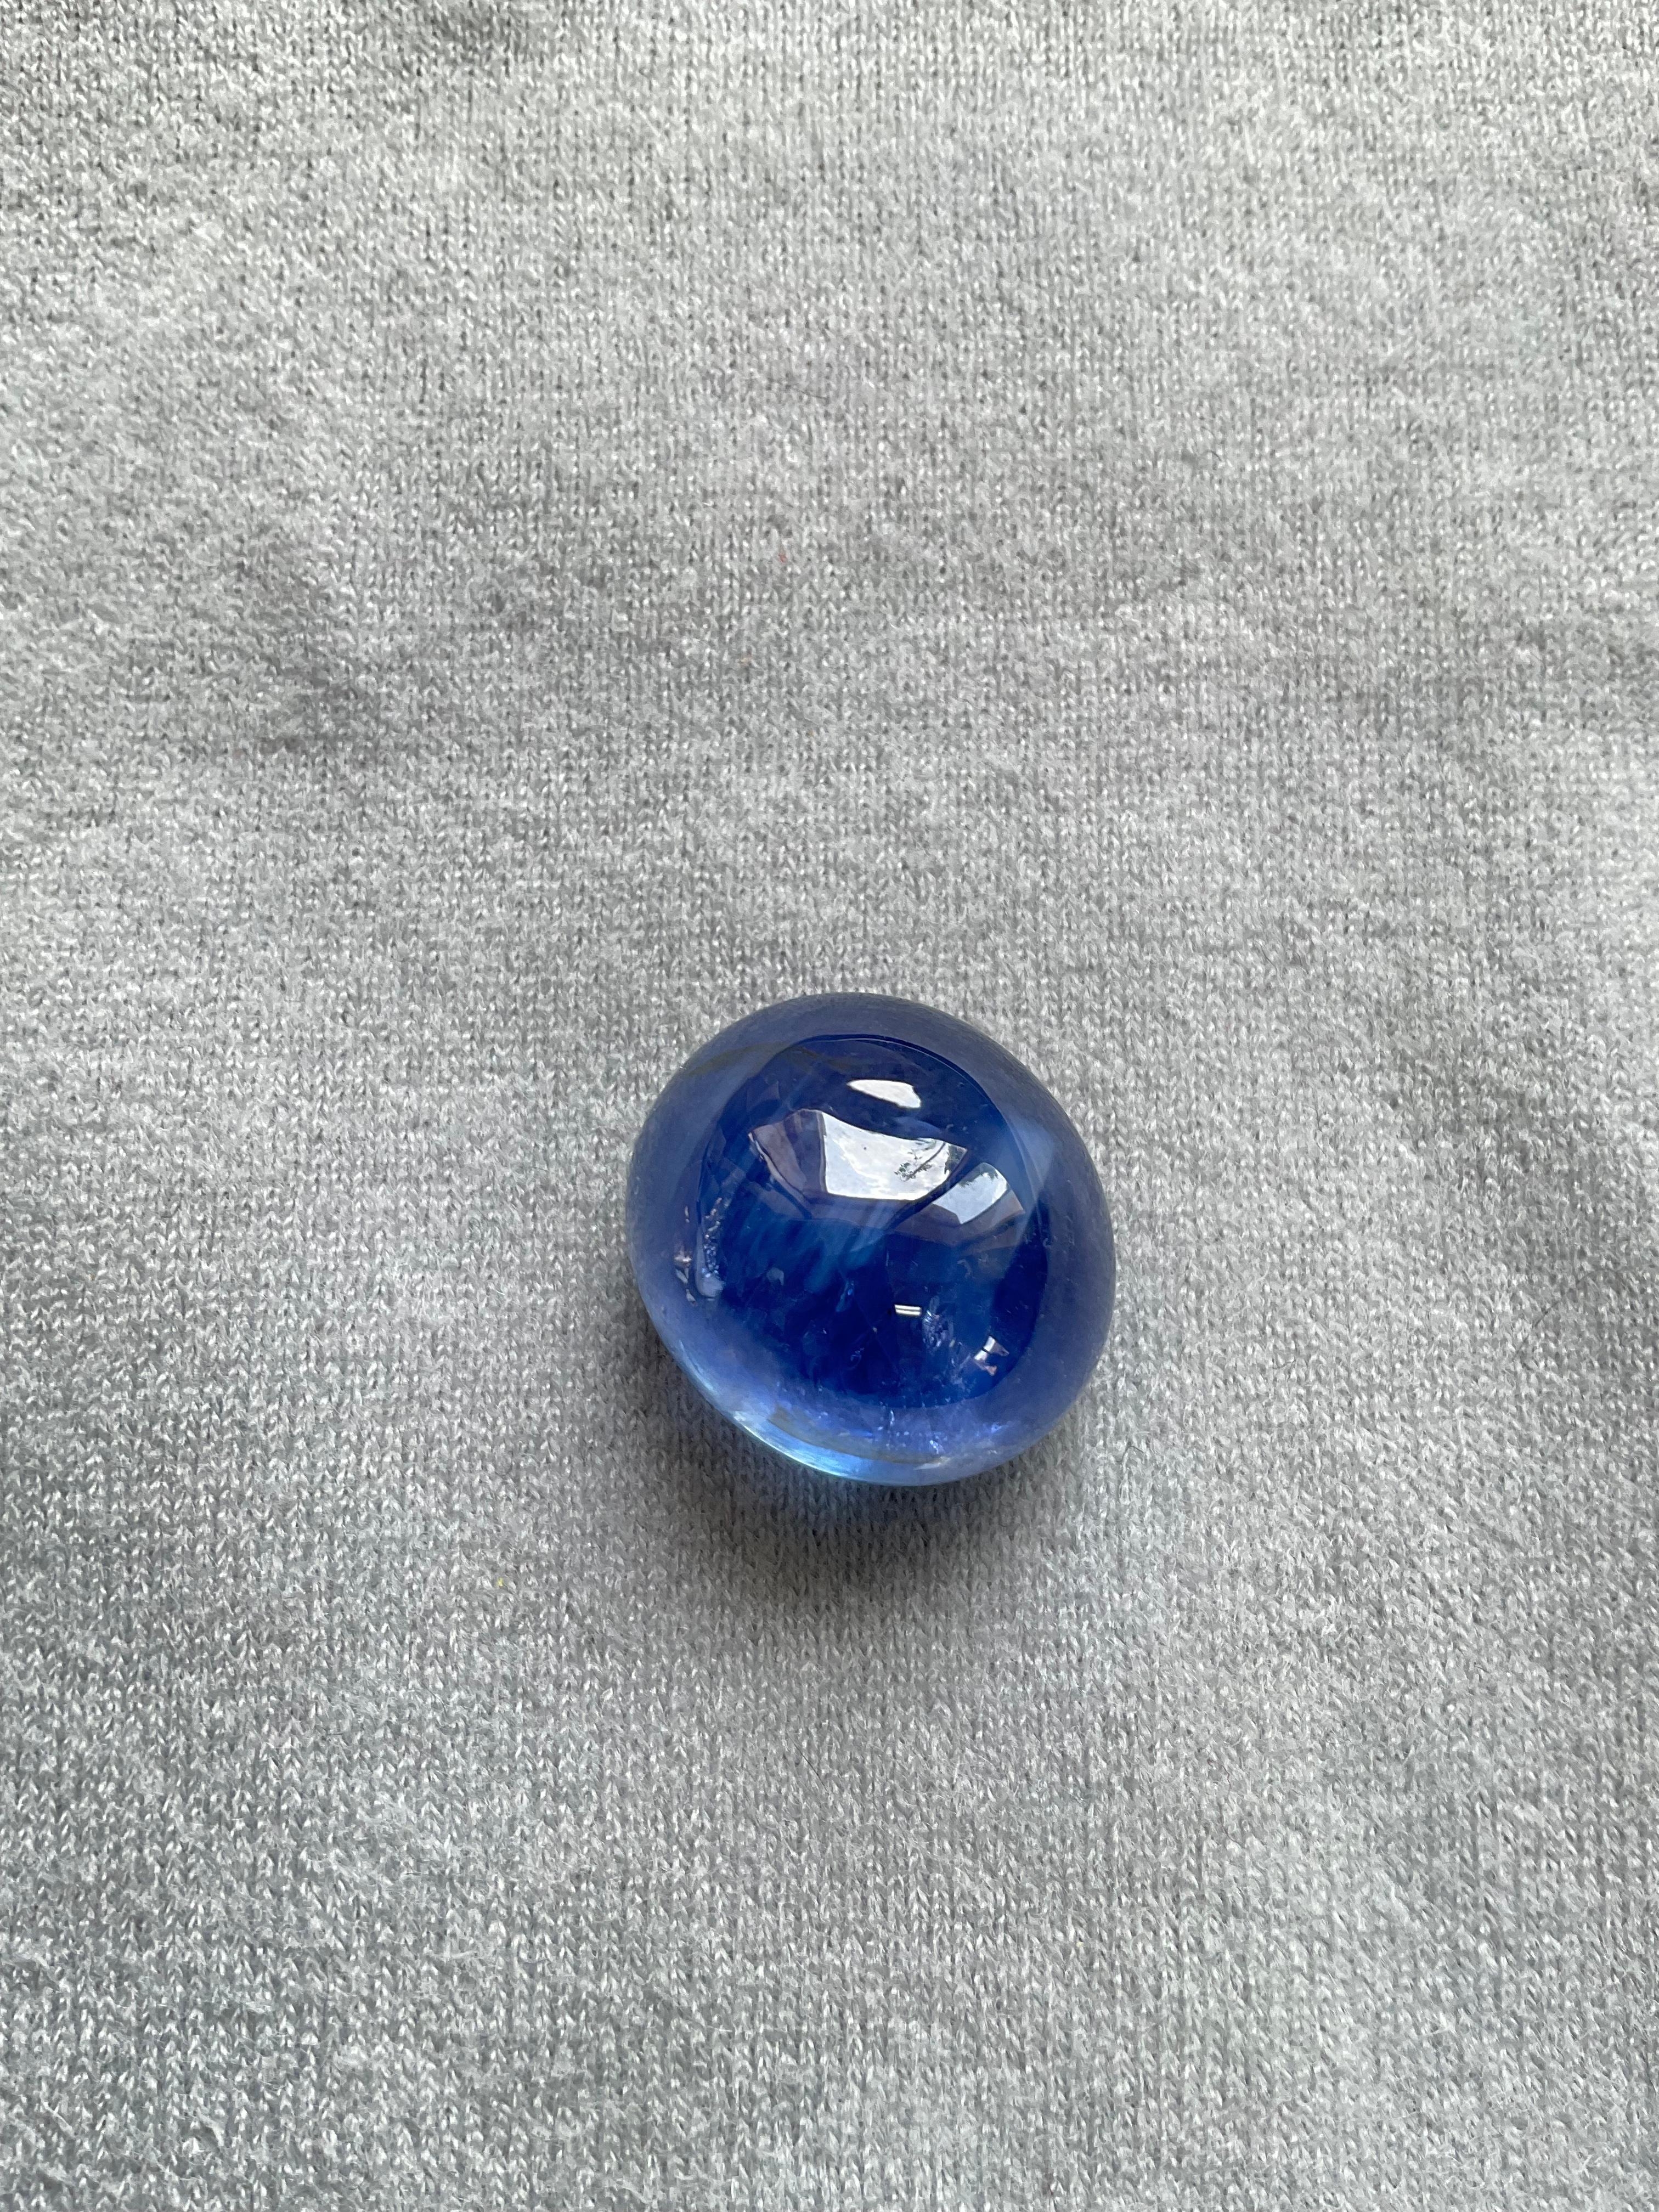 35.85 Carats Ceylon Blue sapphire No heat Cab For Fine Jewellery

Gemstone: Blue Sapphire No Heat
Type: Ceylon
Shape:  Round
Carat weight: 35.85

Ceylon Blue sapphires are highly sought-after for their exceptional color, clarity, and quality. These